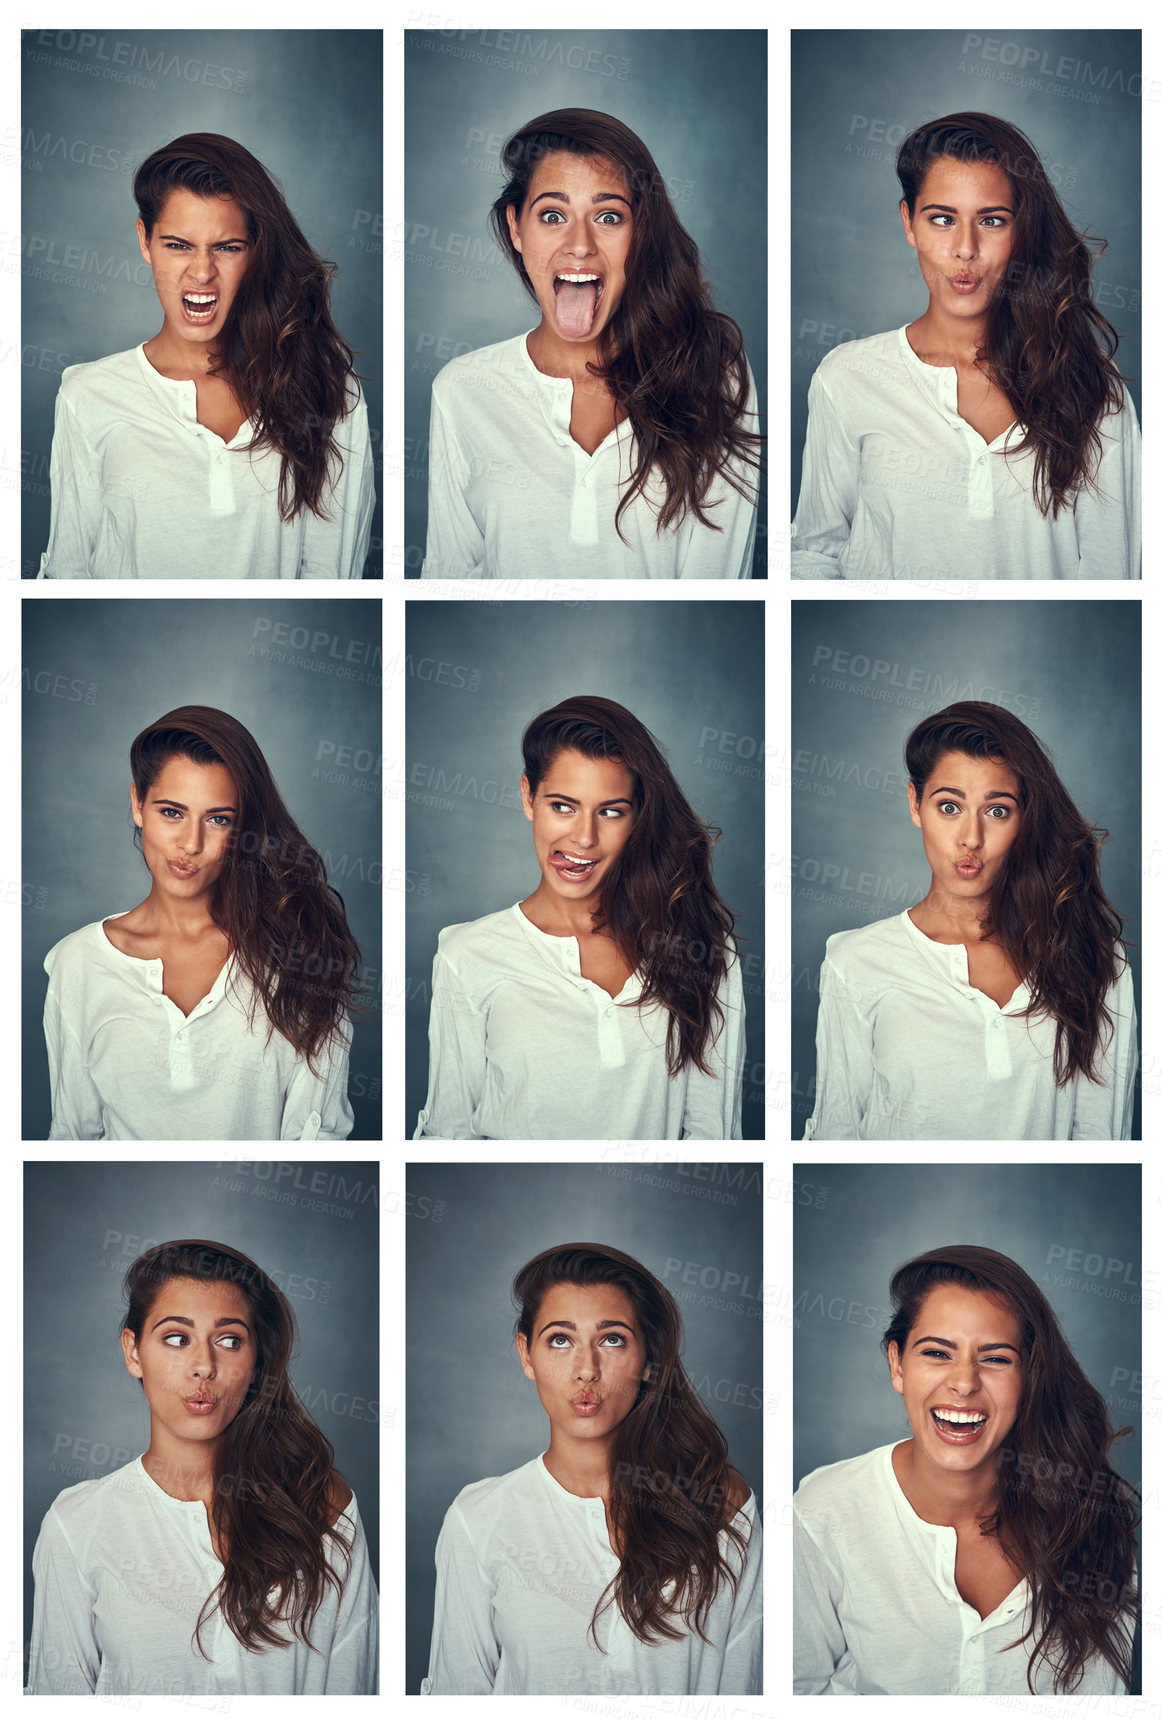 Buy stock photo Composite shot of a beautiful young woman pulling funny faces against a gray background in the studio